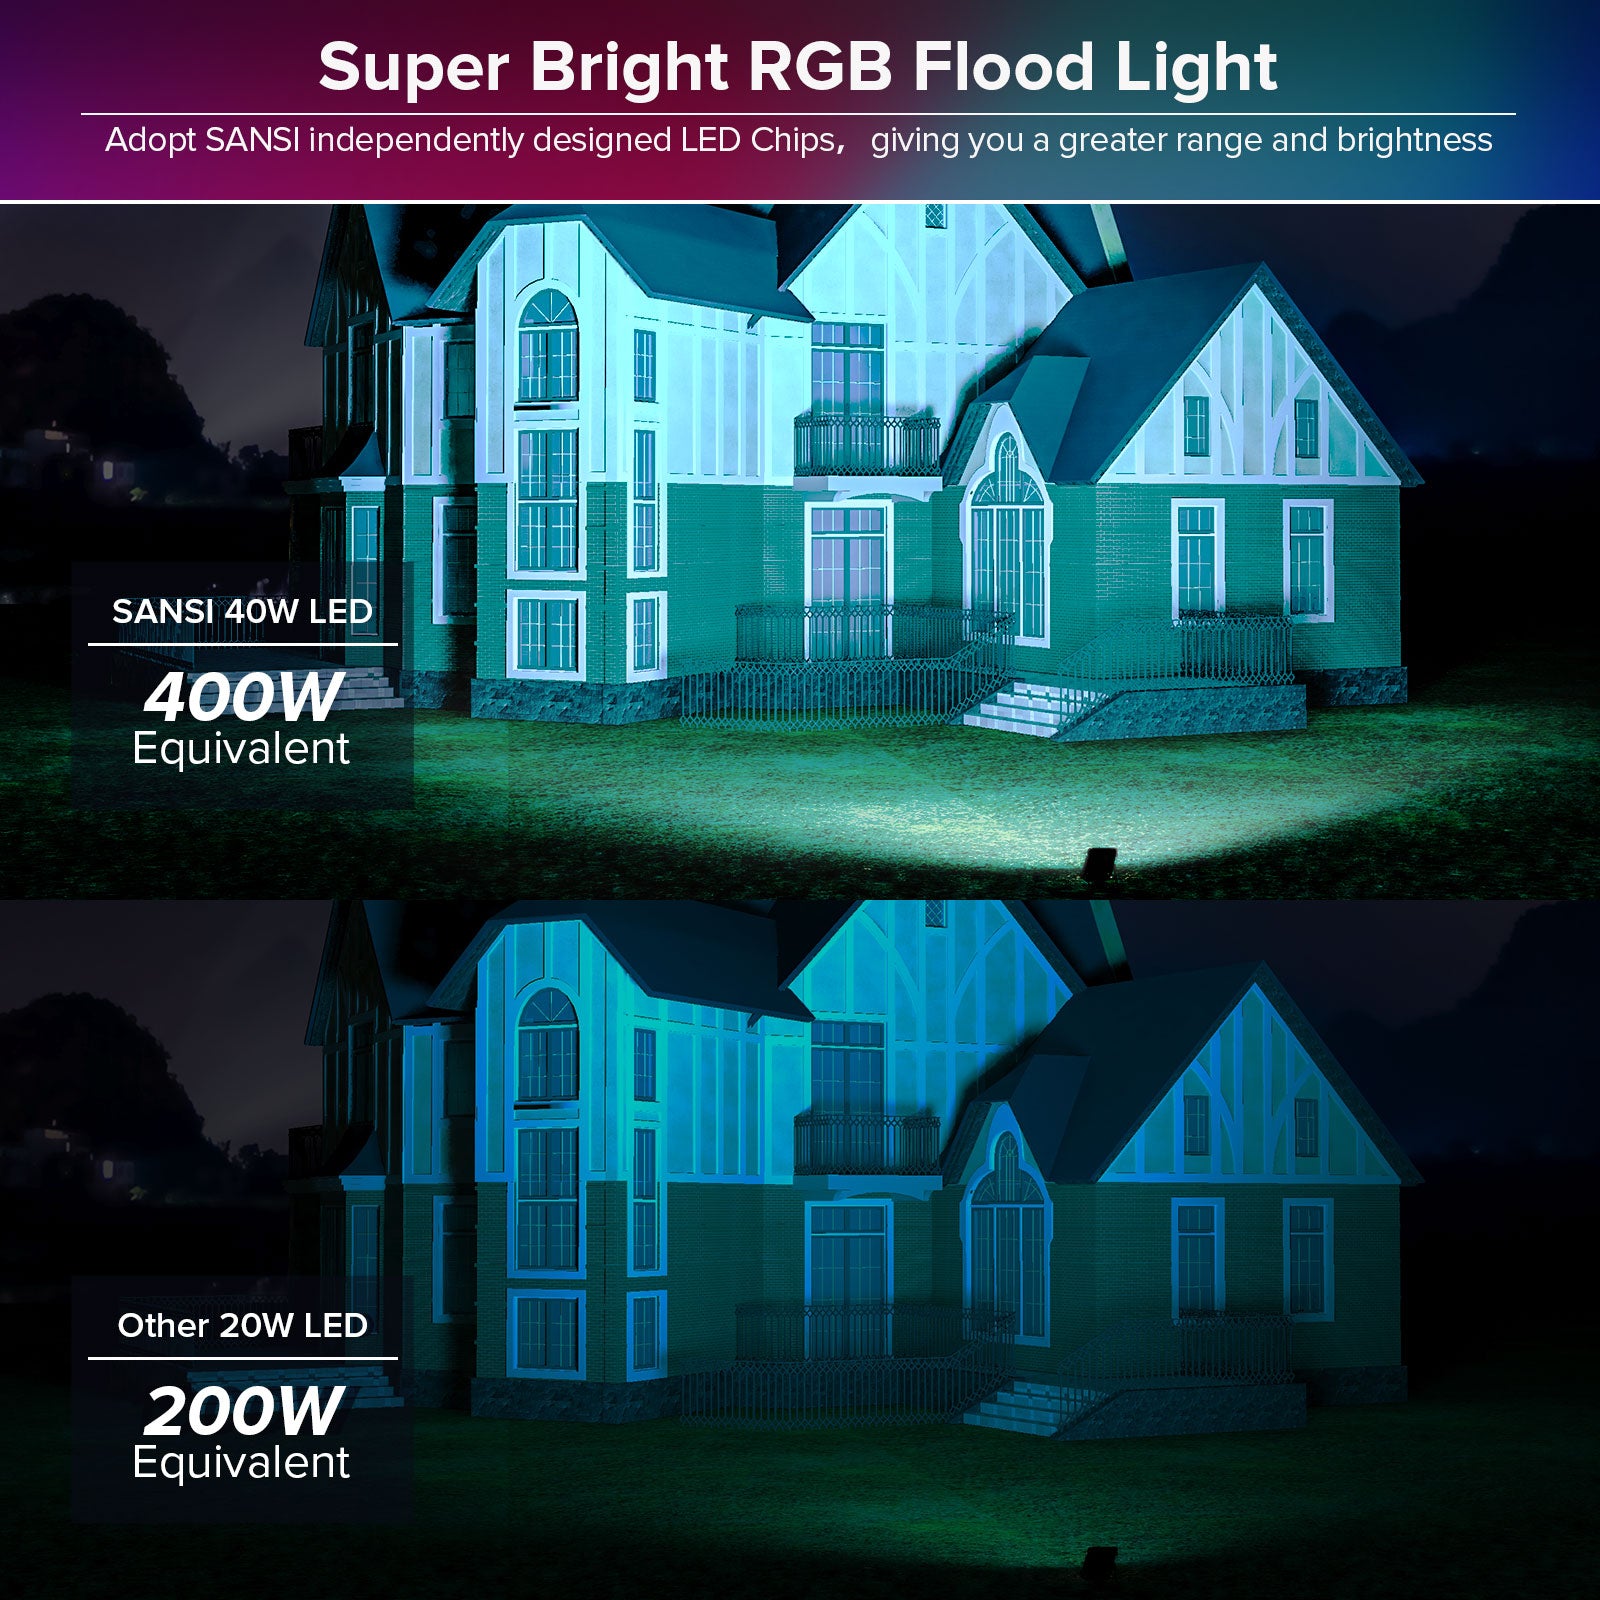 40W Super Bright RGB Led Flood Light，which is adopted SANSI independently designed LED Chips， giving you a greater range and brightness.